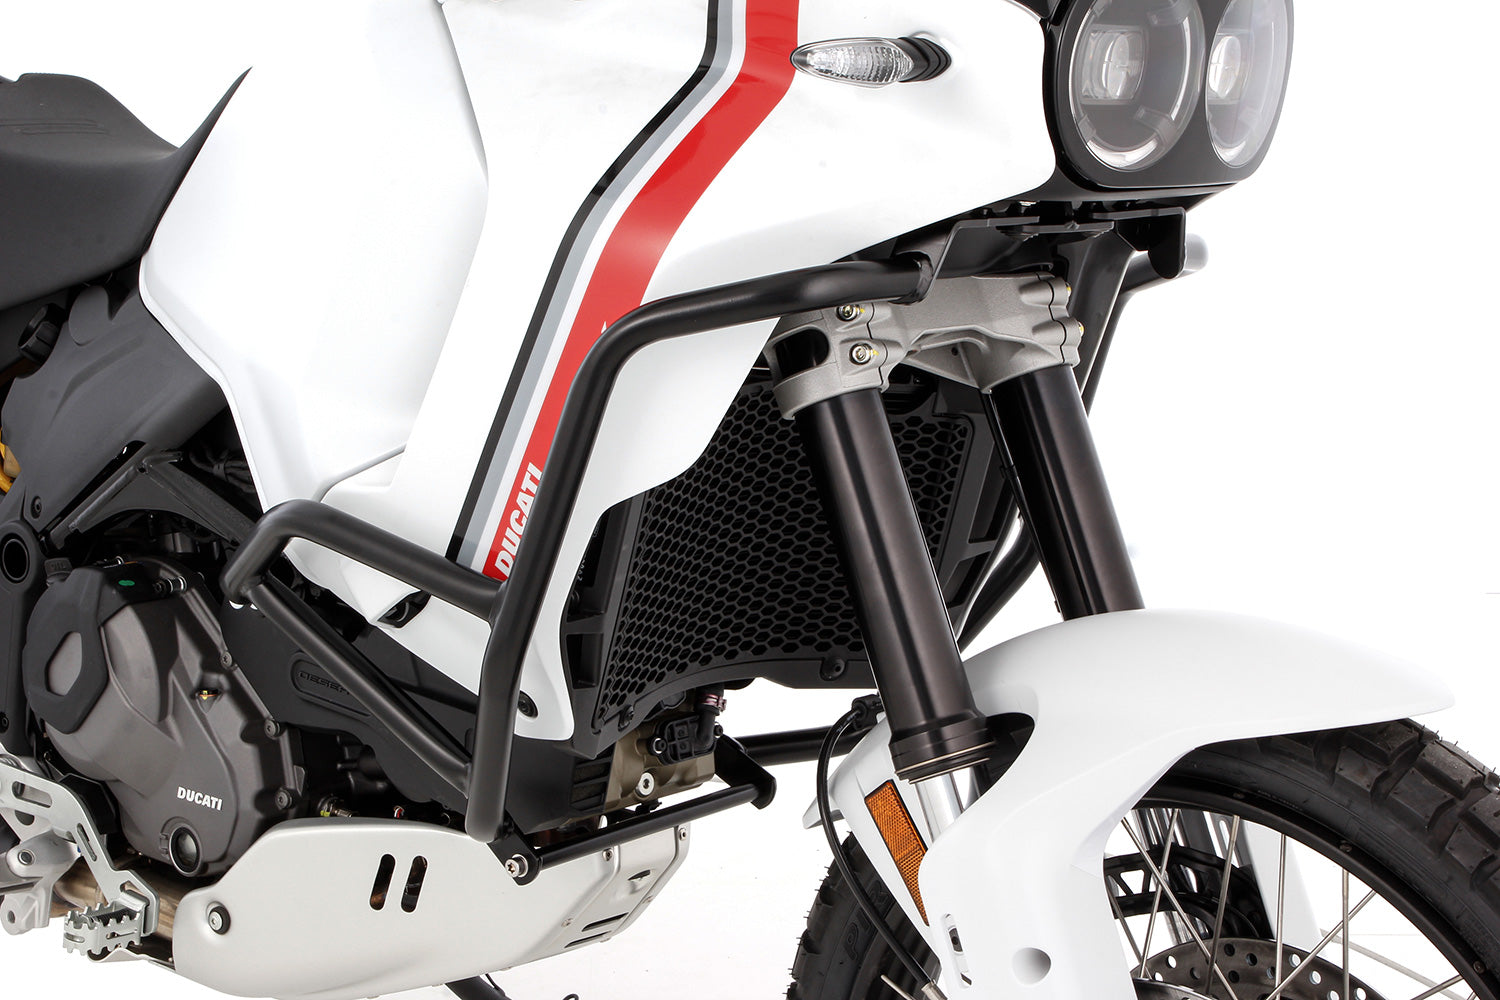 Wunderlich fairing protection bar - black - For models with Standard engine protection